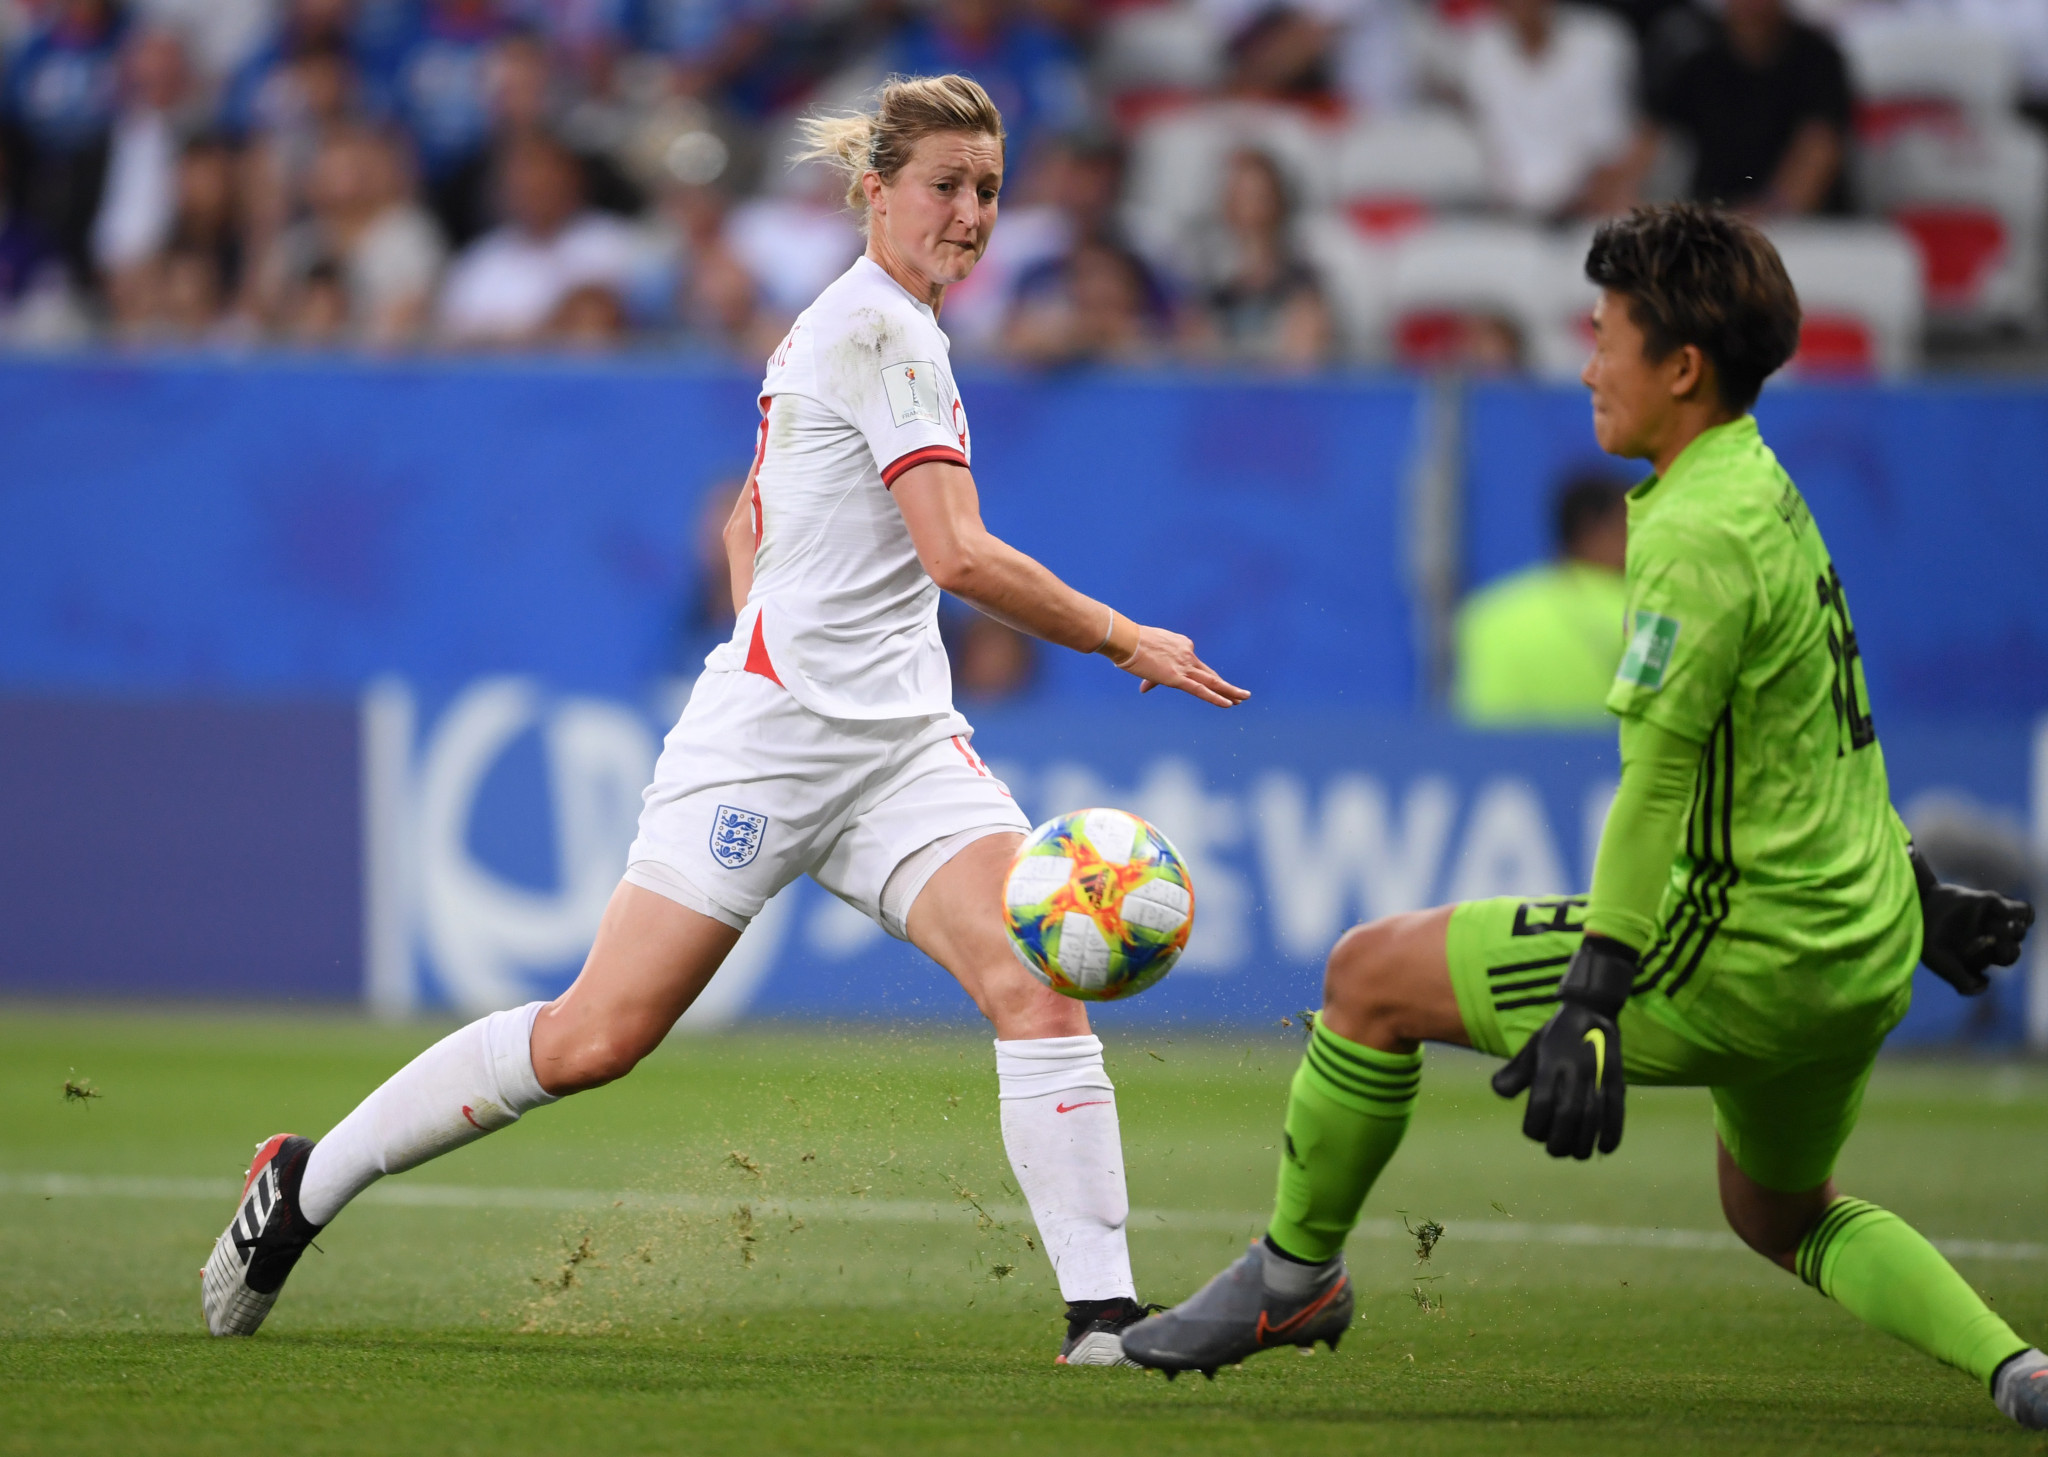 Ellen White opened the scoring for England at Allianz Arena in Nice in the 14th minute ©Getty Images